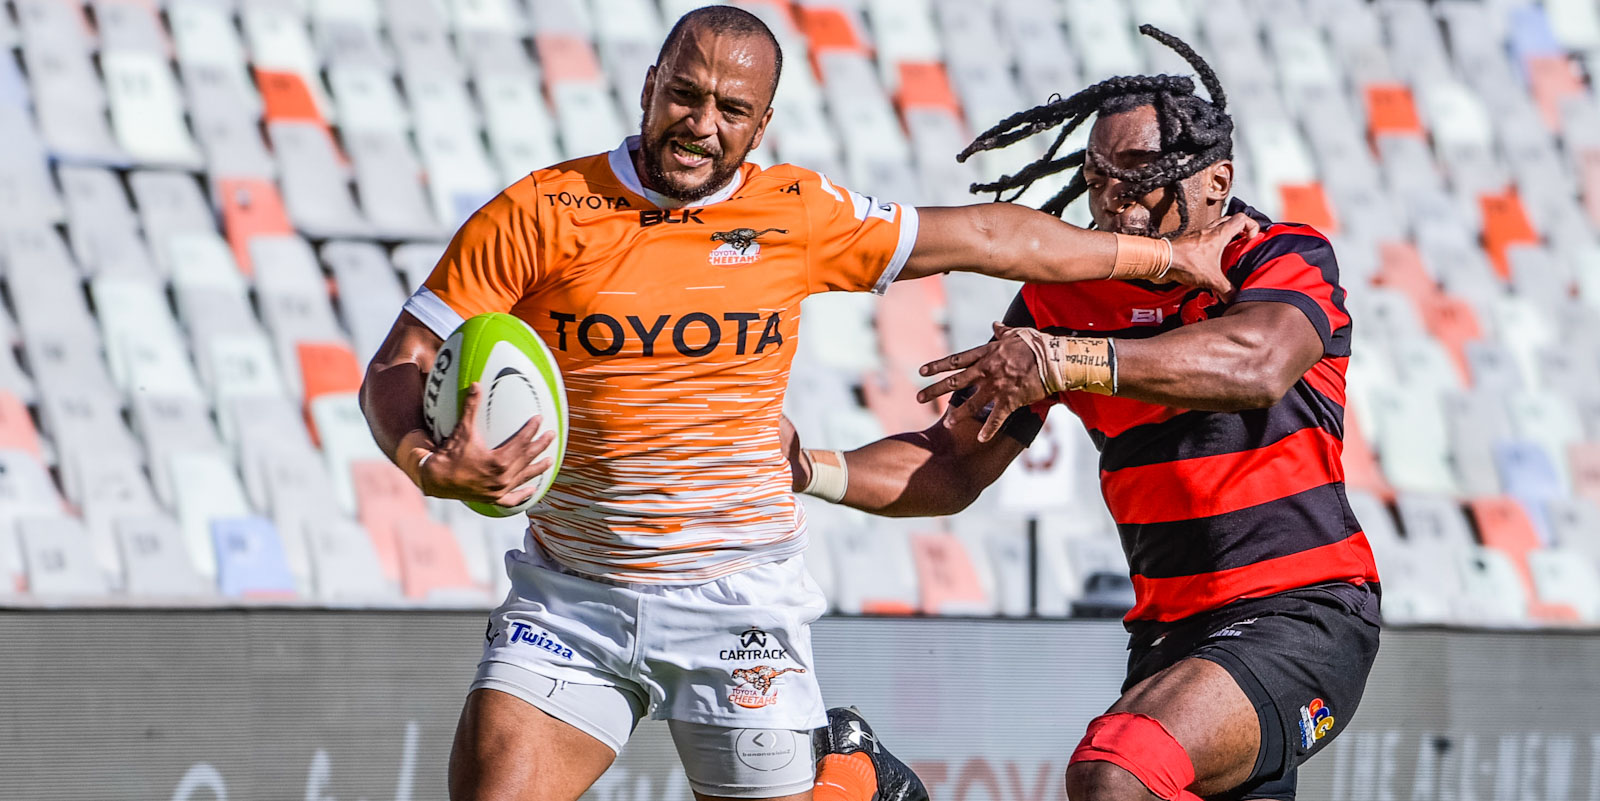 Rhyno Smith scored two of the Toyota Cheetahs' 11 tries